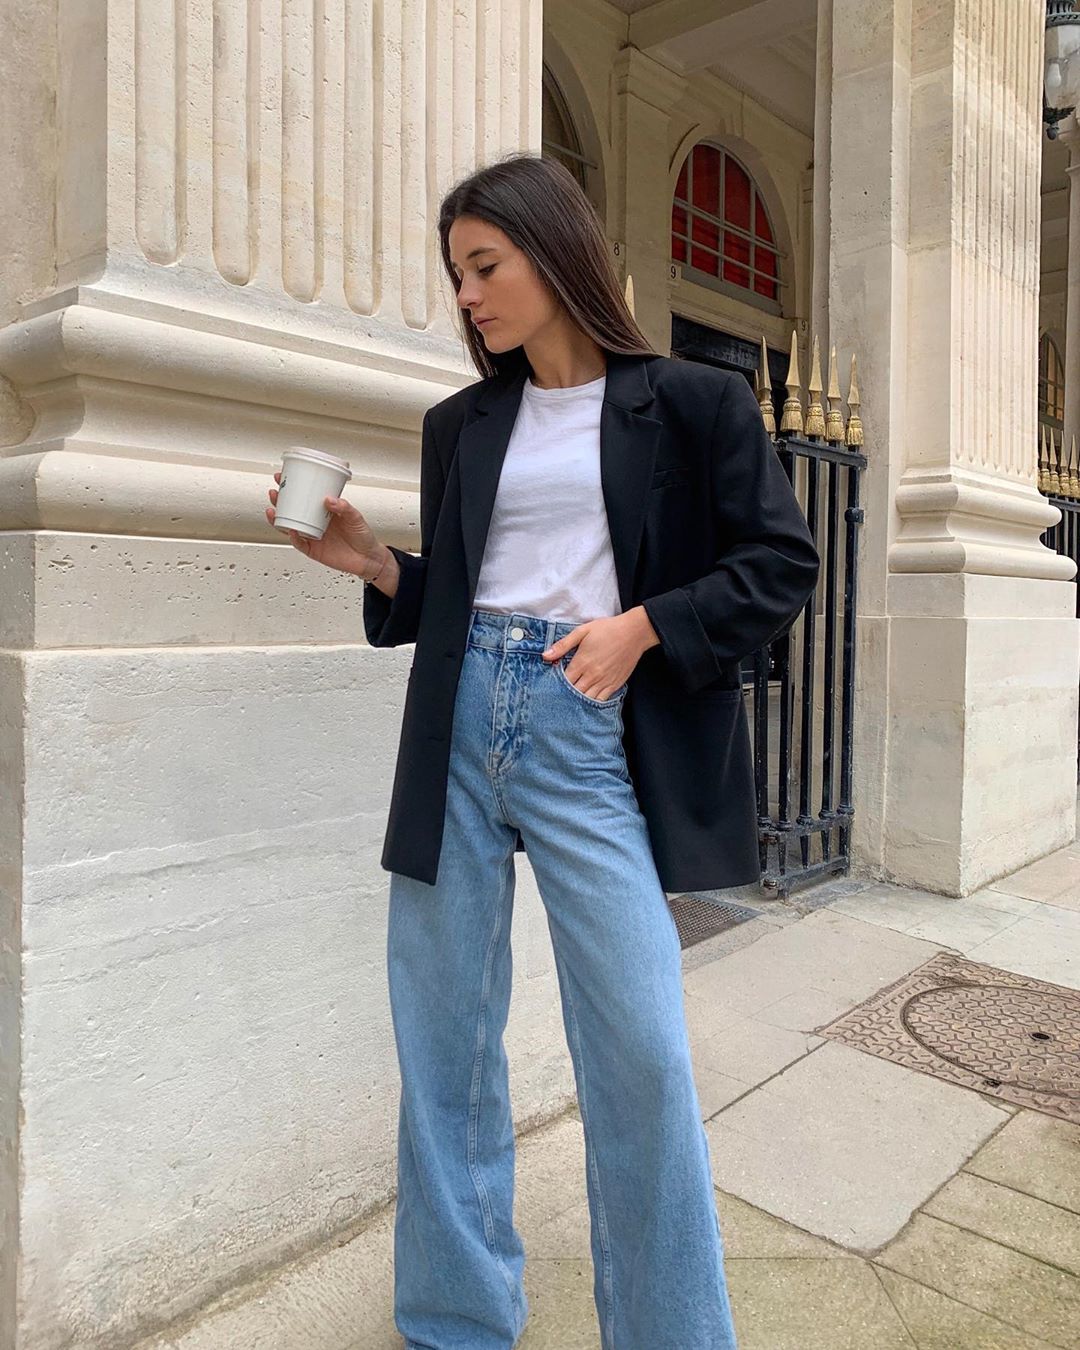 Le Fashion: This French Girl's Chic Outfit is My New Fall Uniform